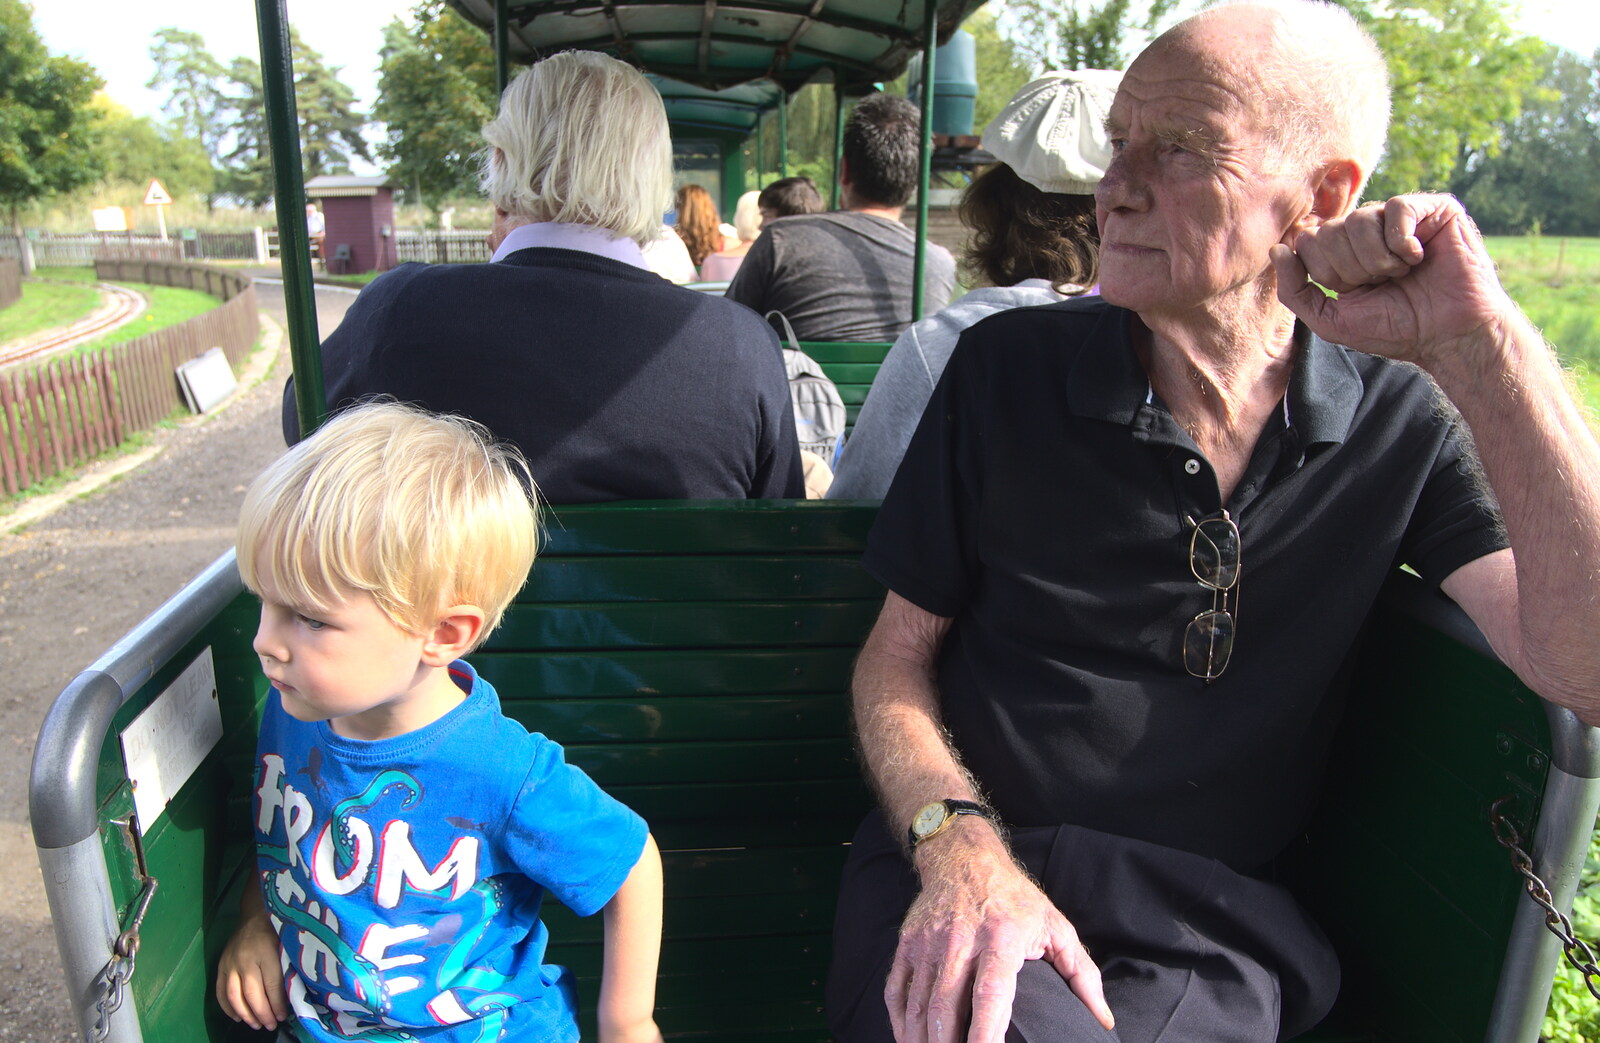 Harry and Grandad on the train from A Trip to Bressingham Steam Museum, Bressingham, Norfolk - 28th September 2014